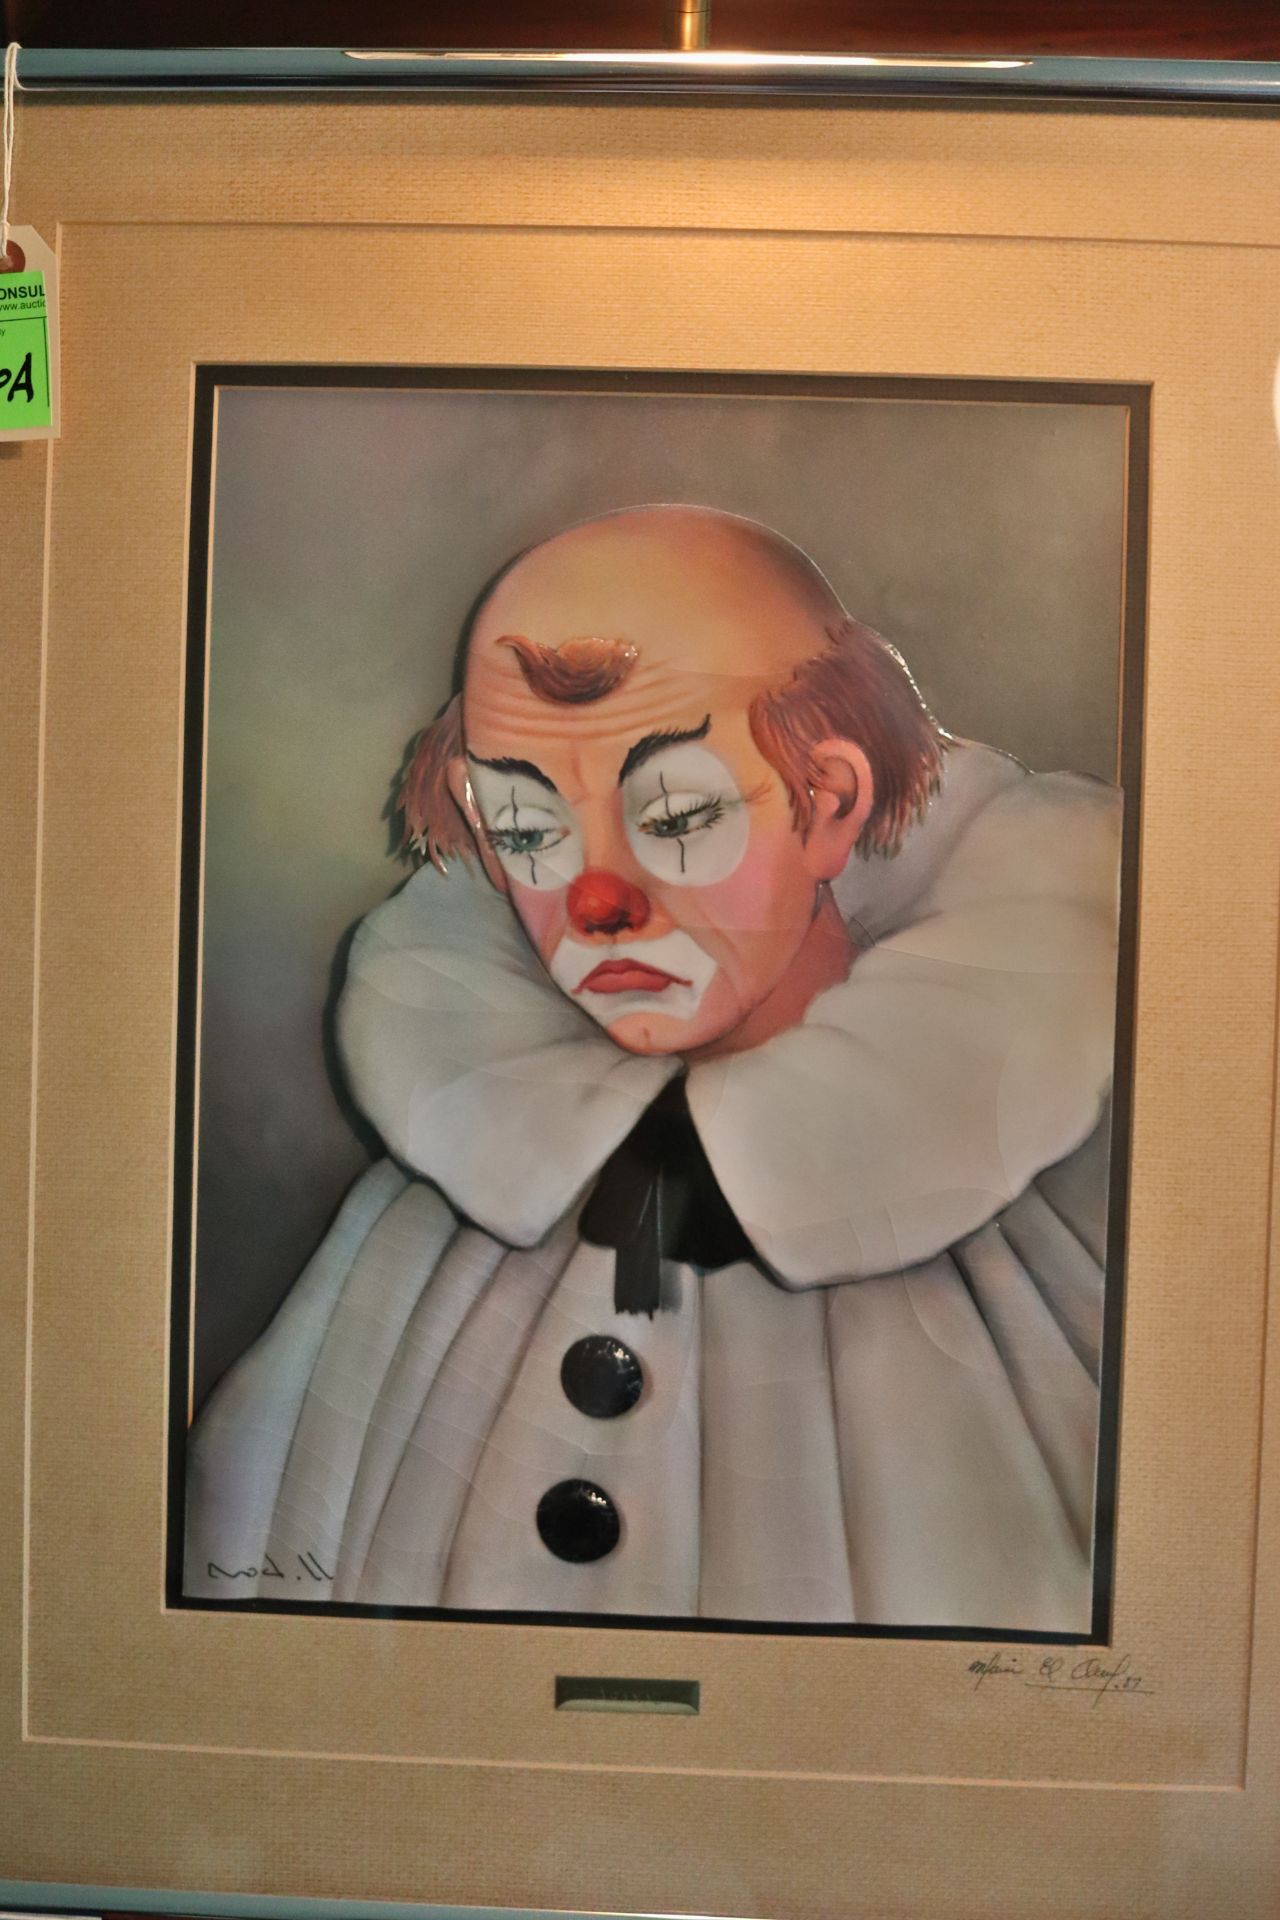 Framed mixed media art piece depicting a clown, unknown artist, dated '87, approximate size 16" x 12